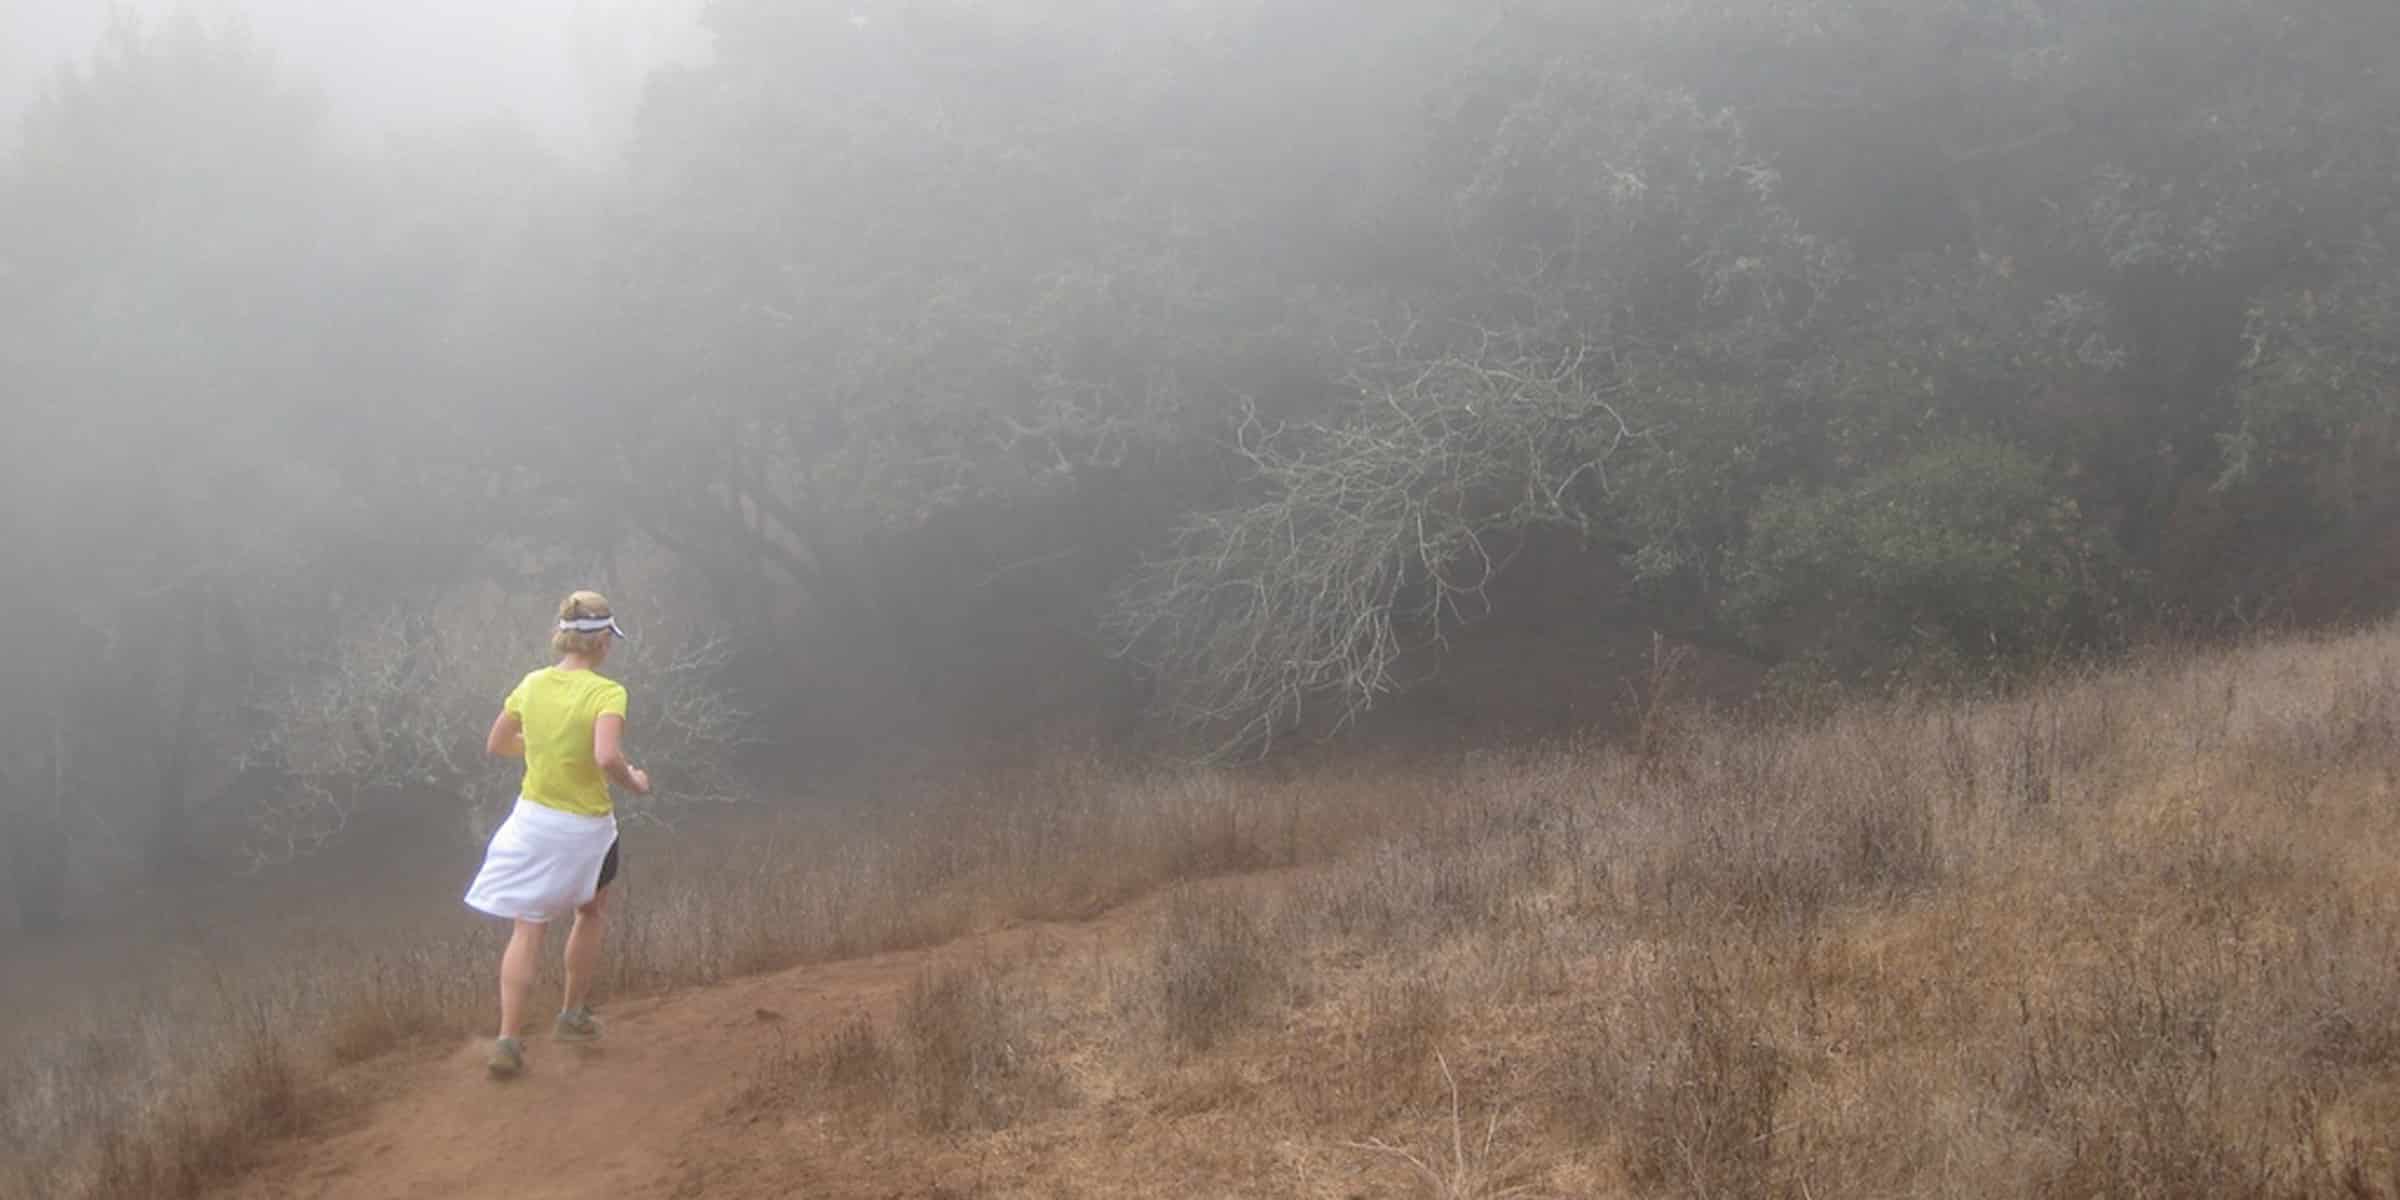 Supporting victims of sexual assault one ‘Fog Run’ at a time